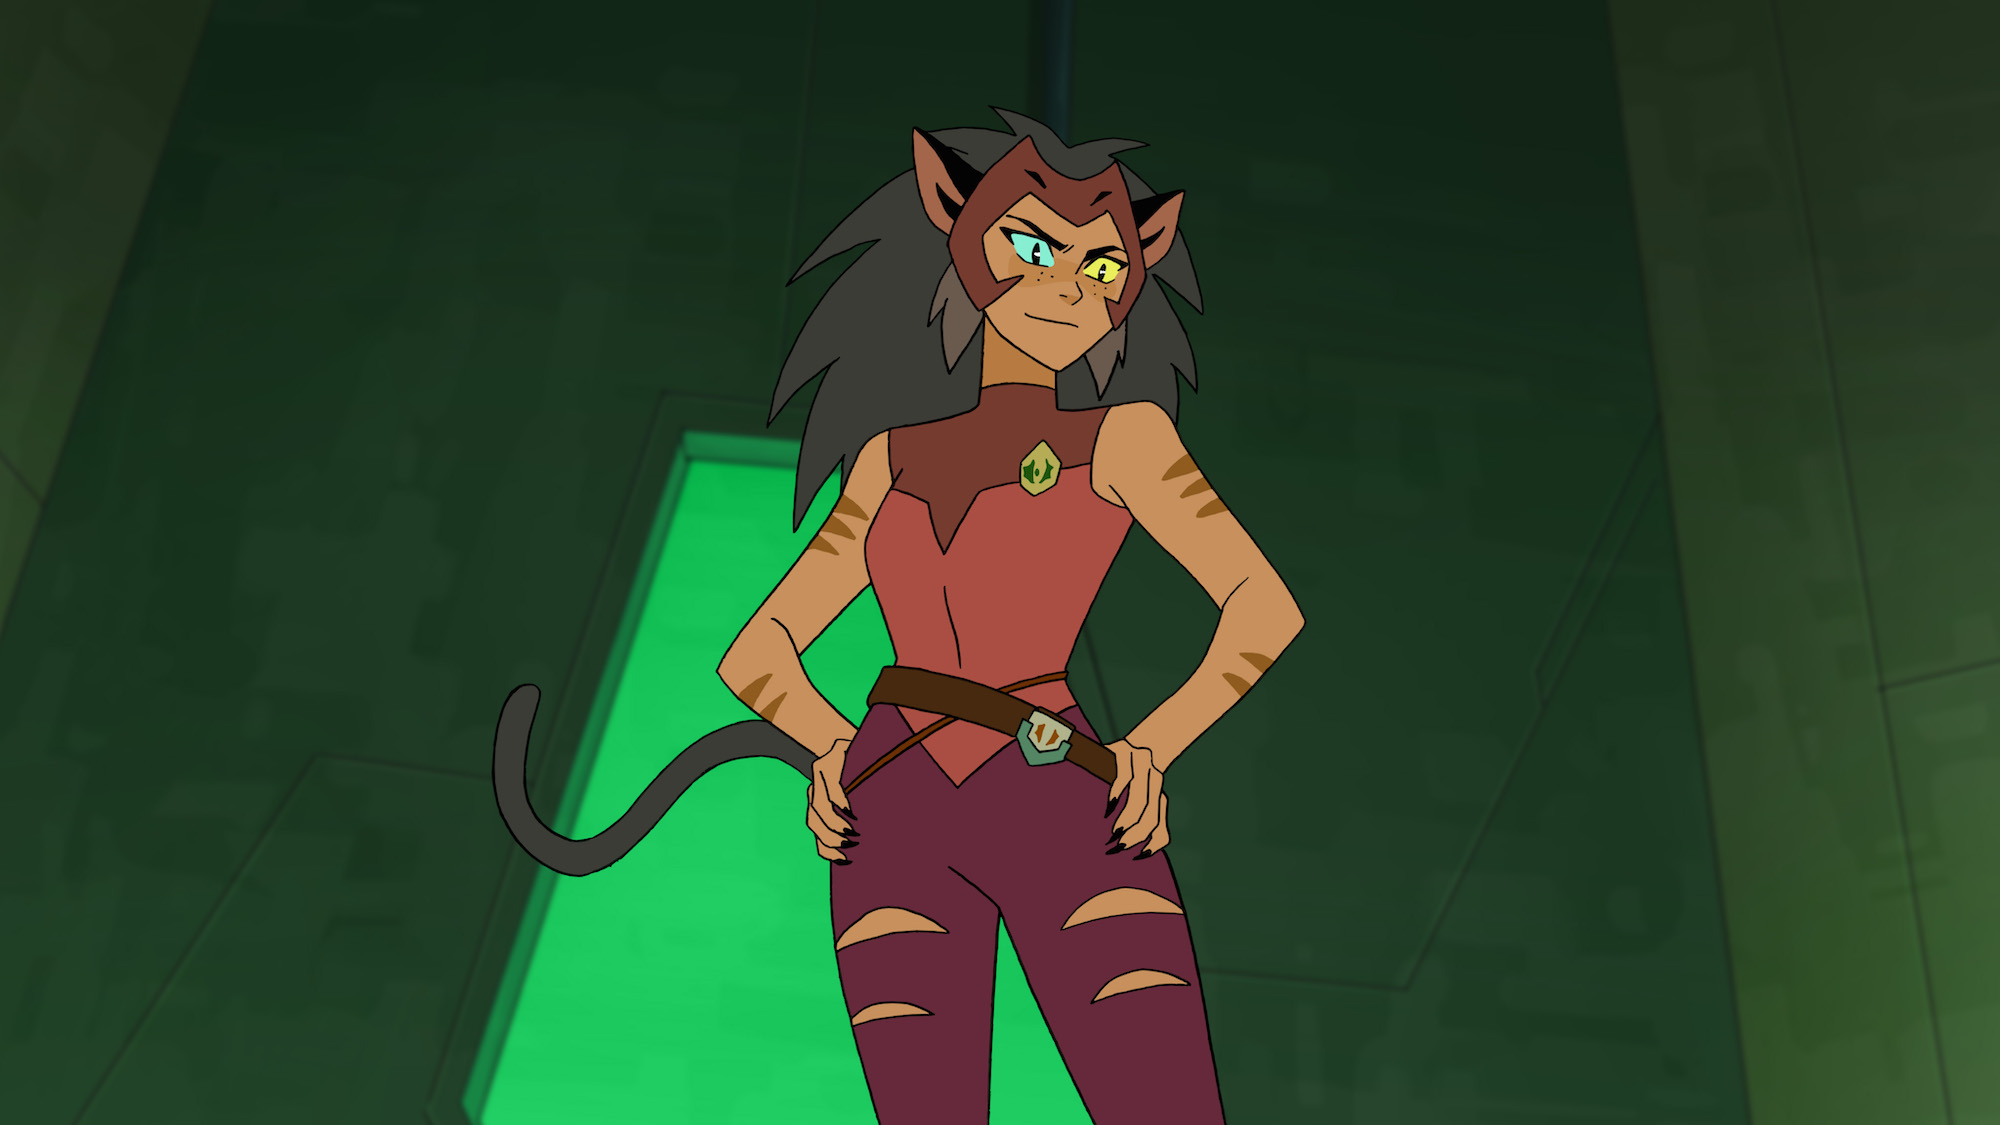 Catra in 'She-Ra and the Princesses of Power